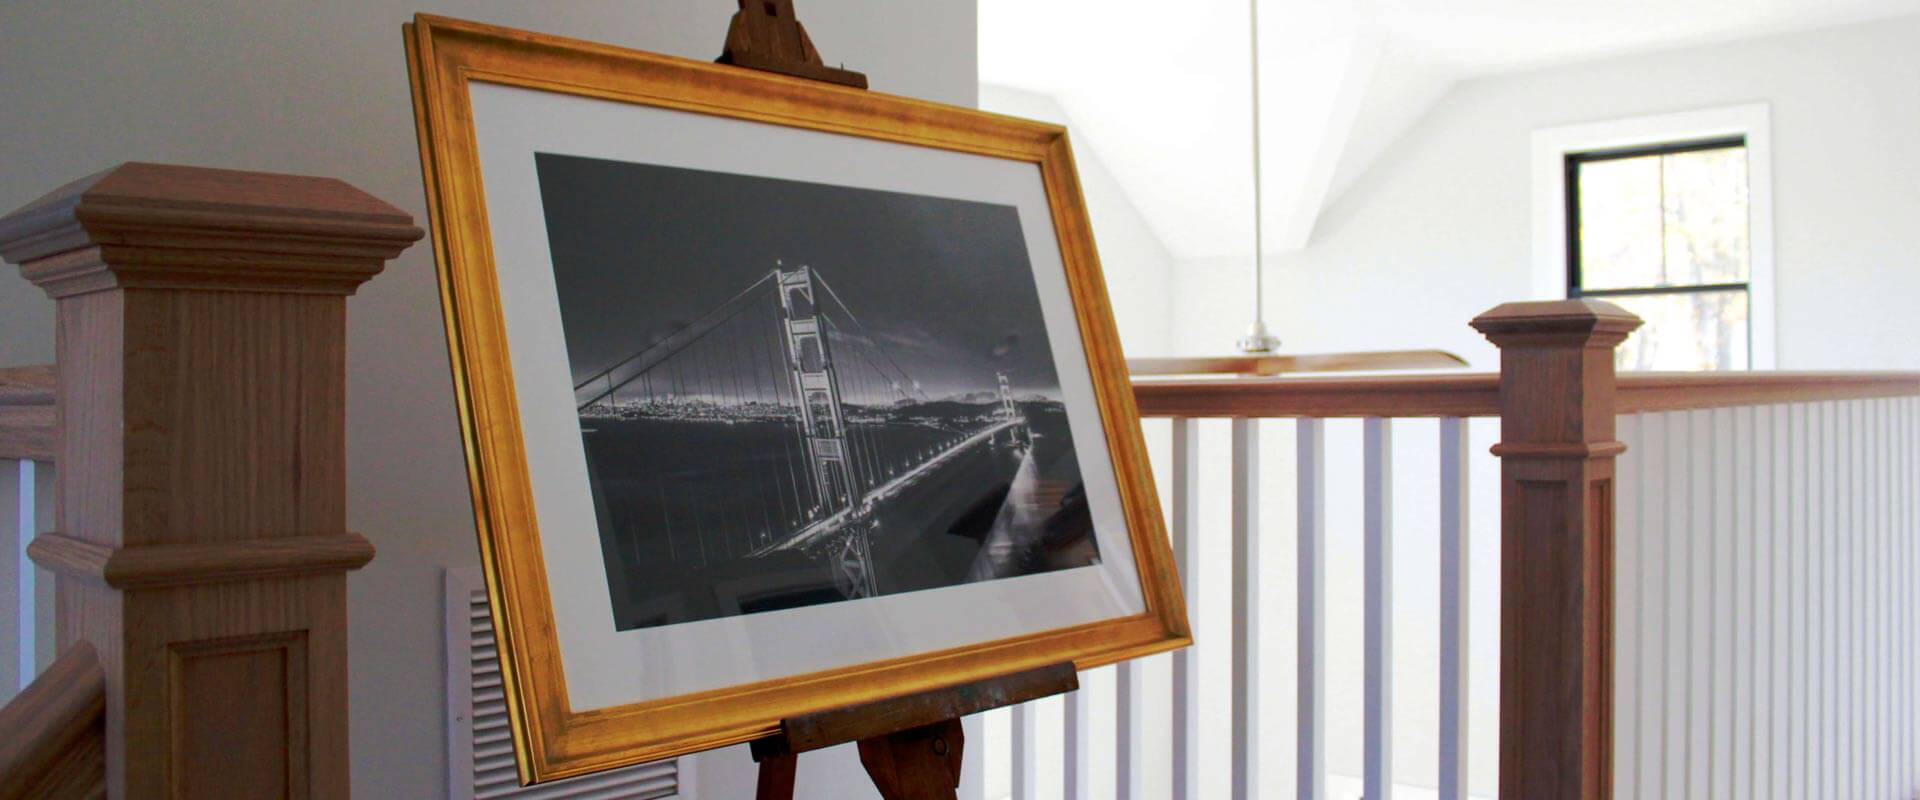 An easel with a photograph on a stair landing.